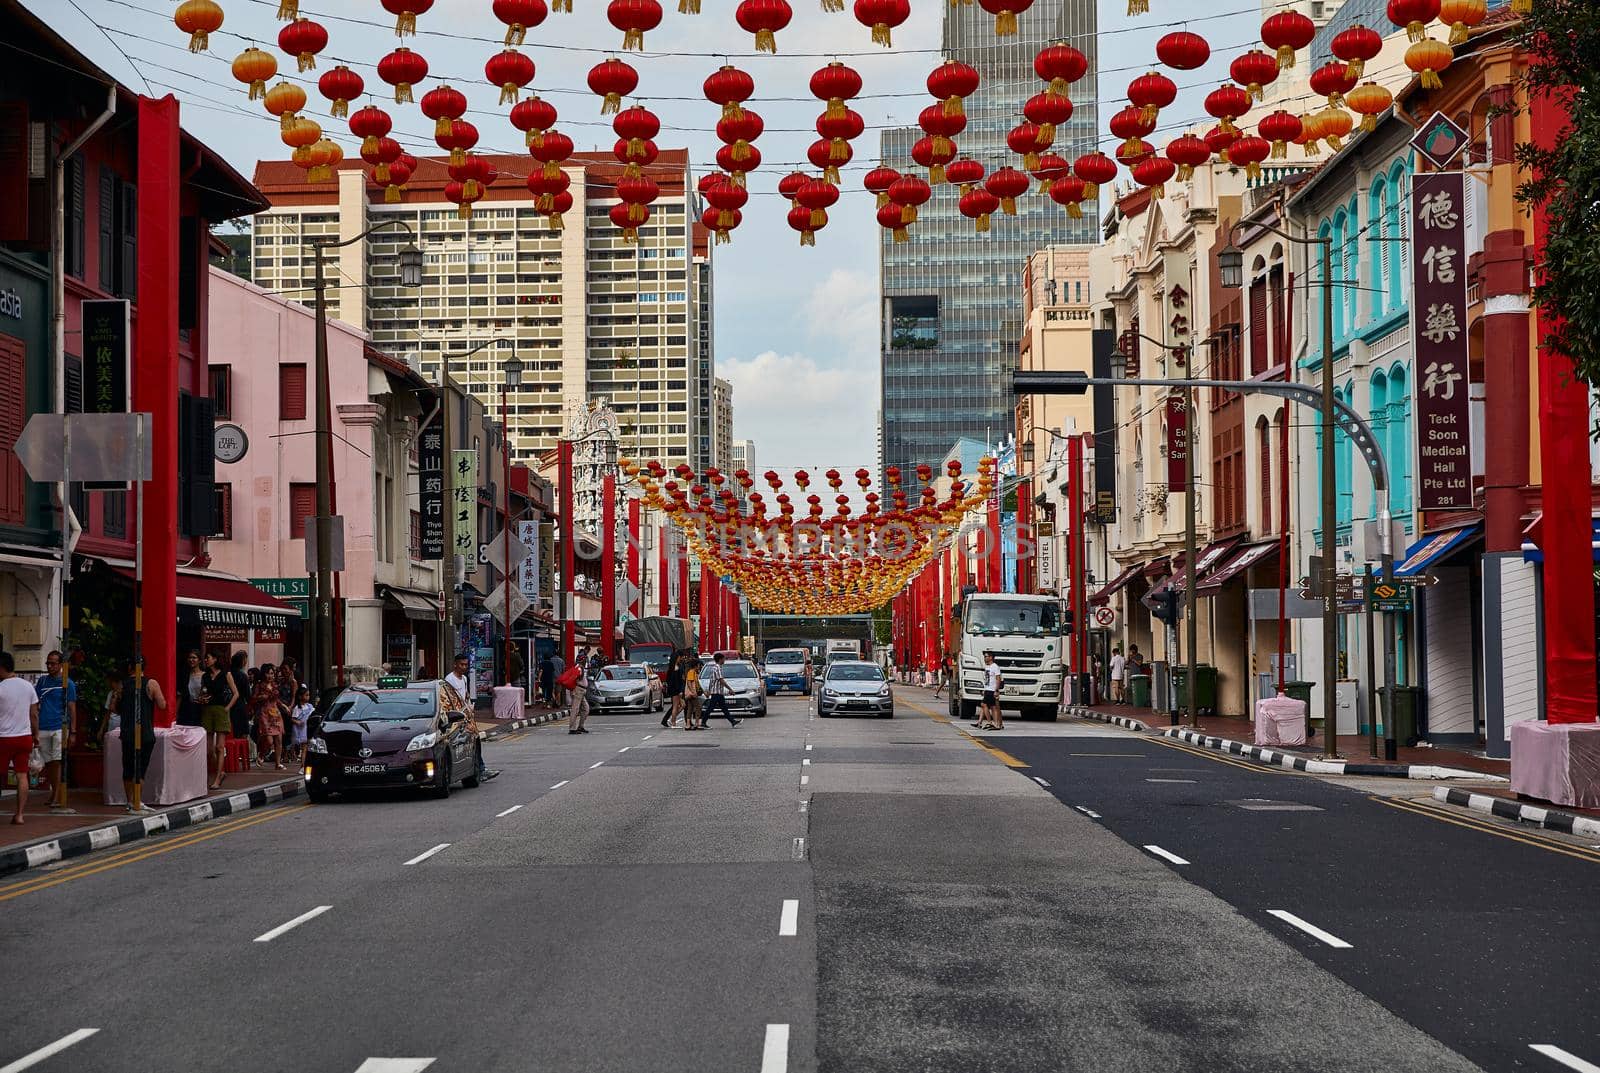 Decorations for the Chinese New Year. 19.01.2019 Chinatown, Singapore by EvgeniyQW